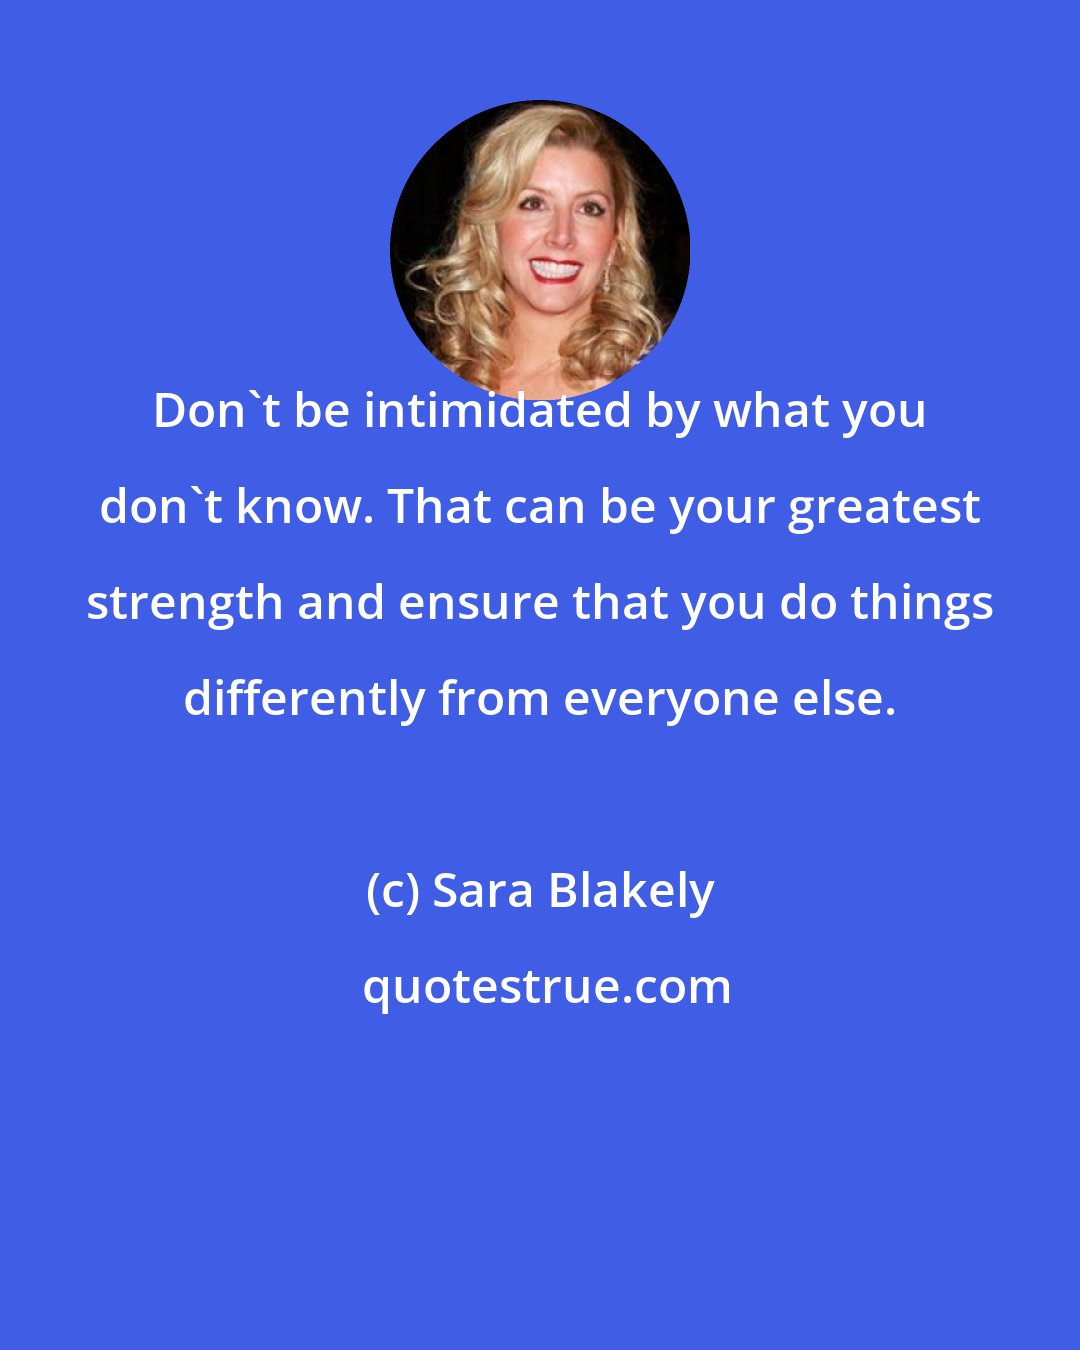 Sara Blakely: Don't be intimidated by what you don't know. That can be your greatest strength and ensure that you do things differently from everyone else.